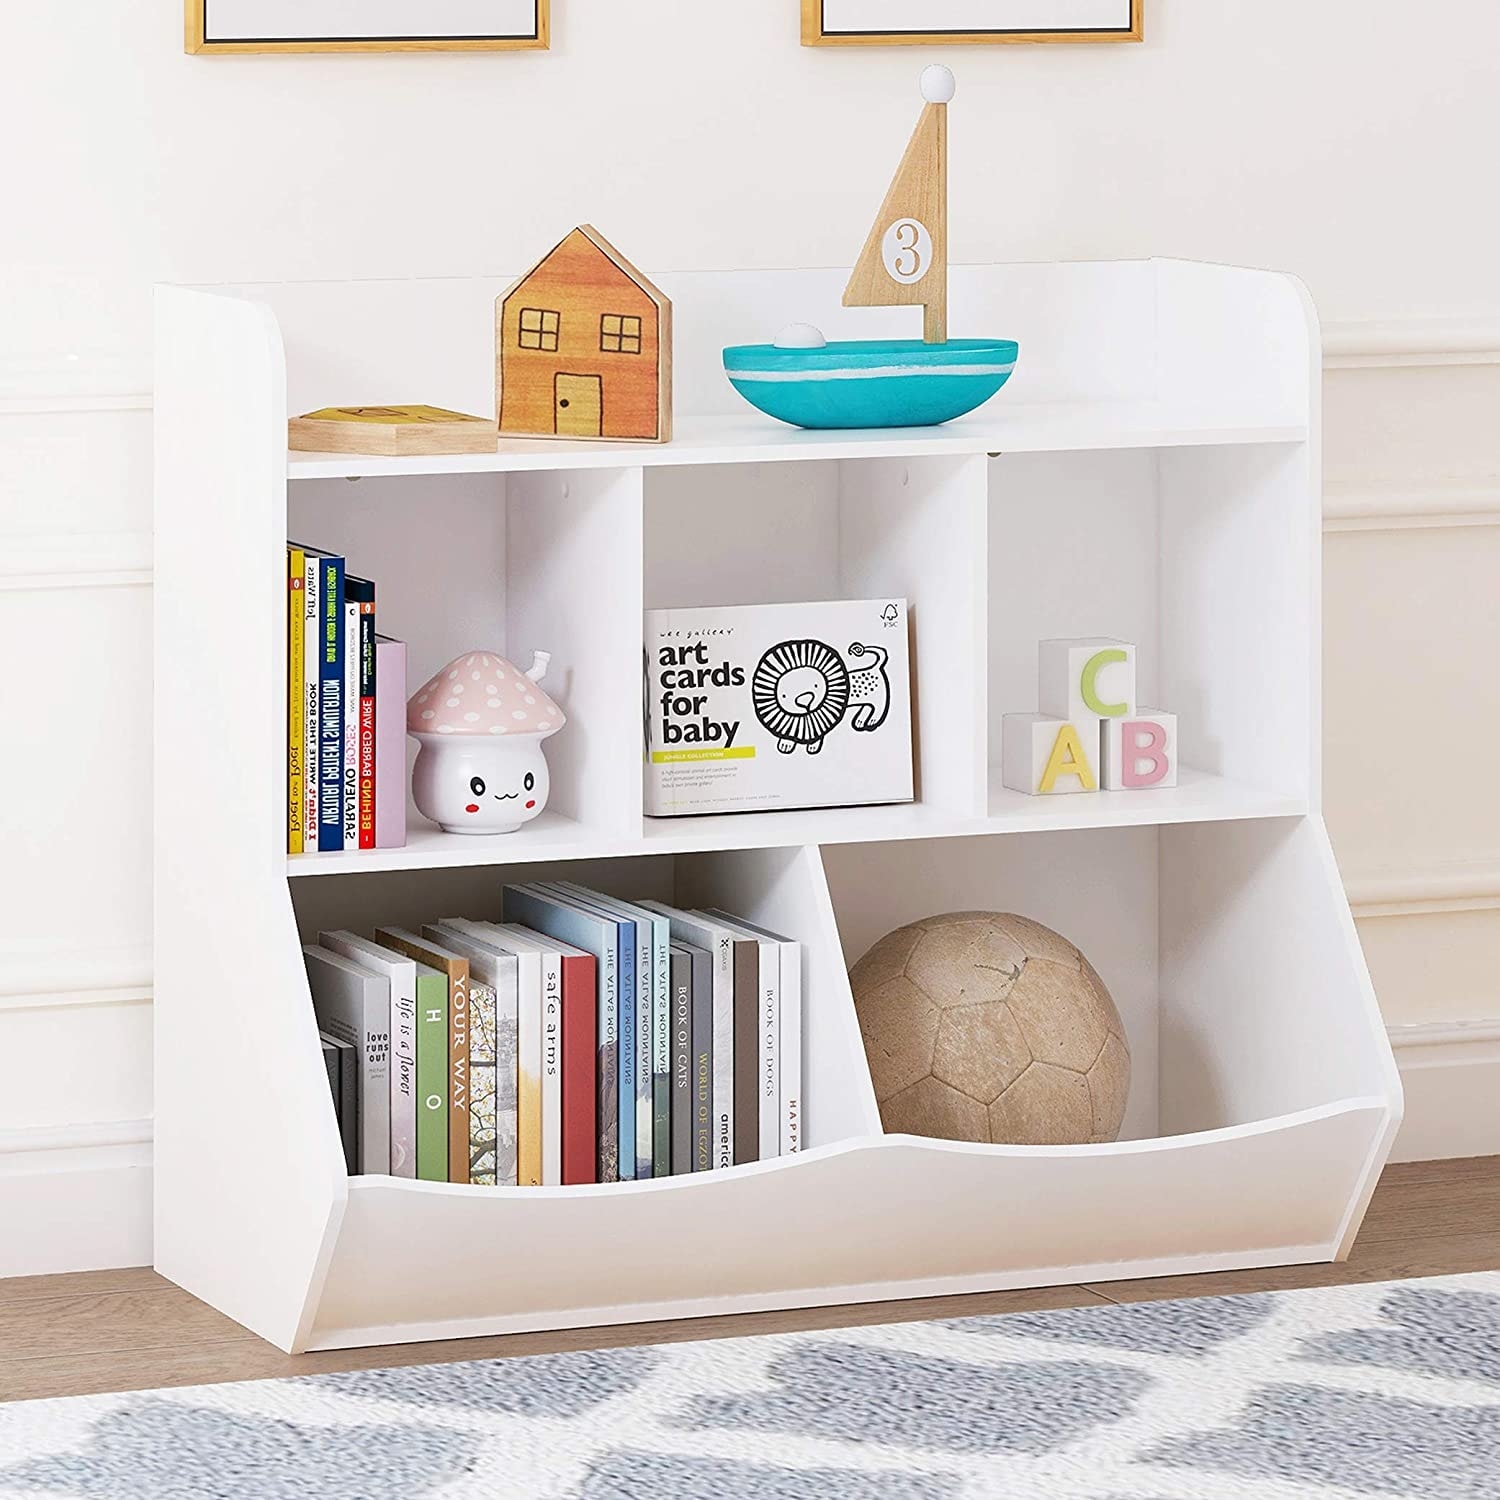 UTEX Toy Storage Organizer 40”Kids Toy Storage Cubby with Bins,Toy Boxes and Storage for Playroom,Bedroom,Nursery School,White 